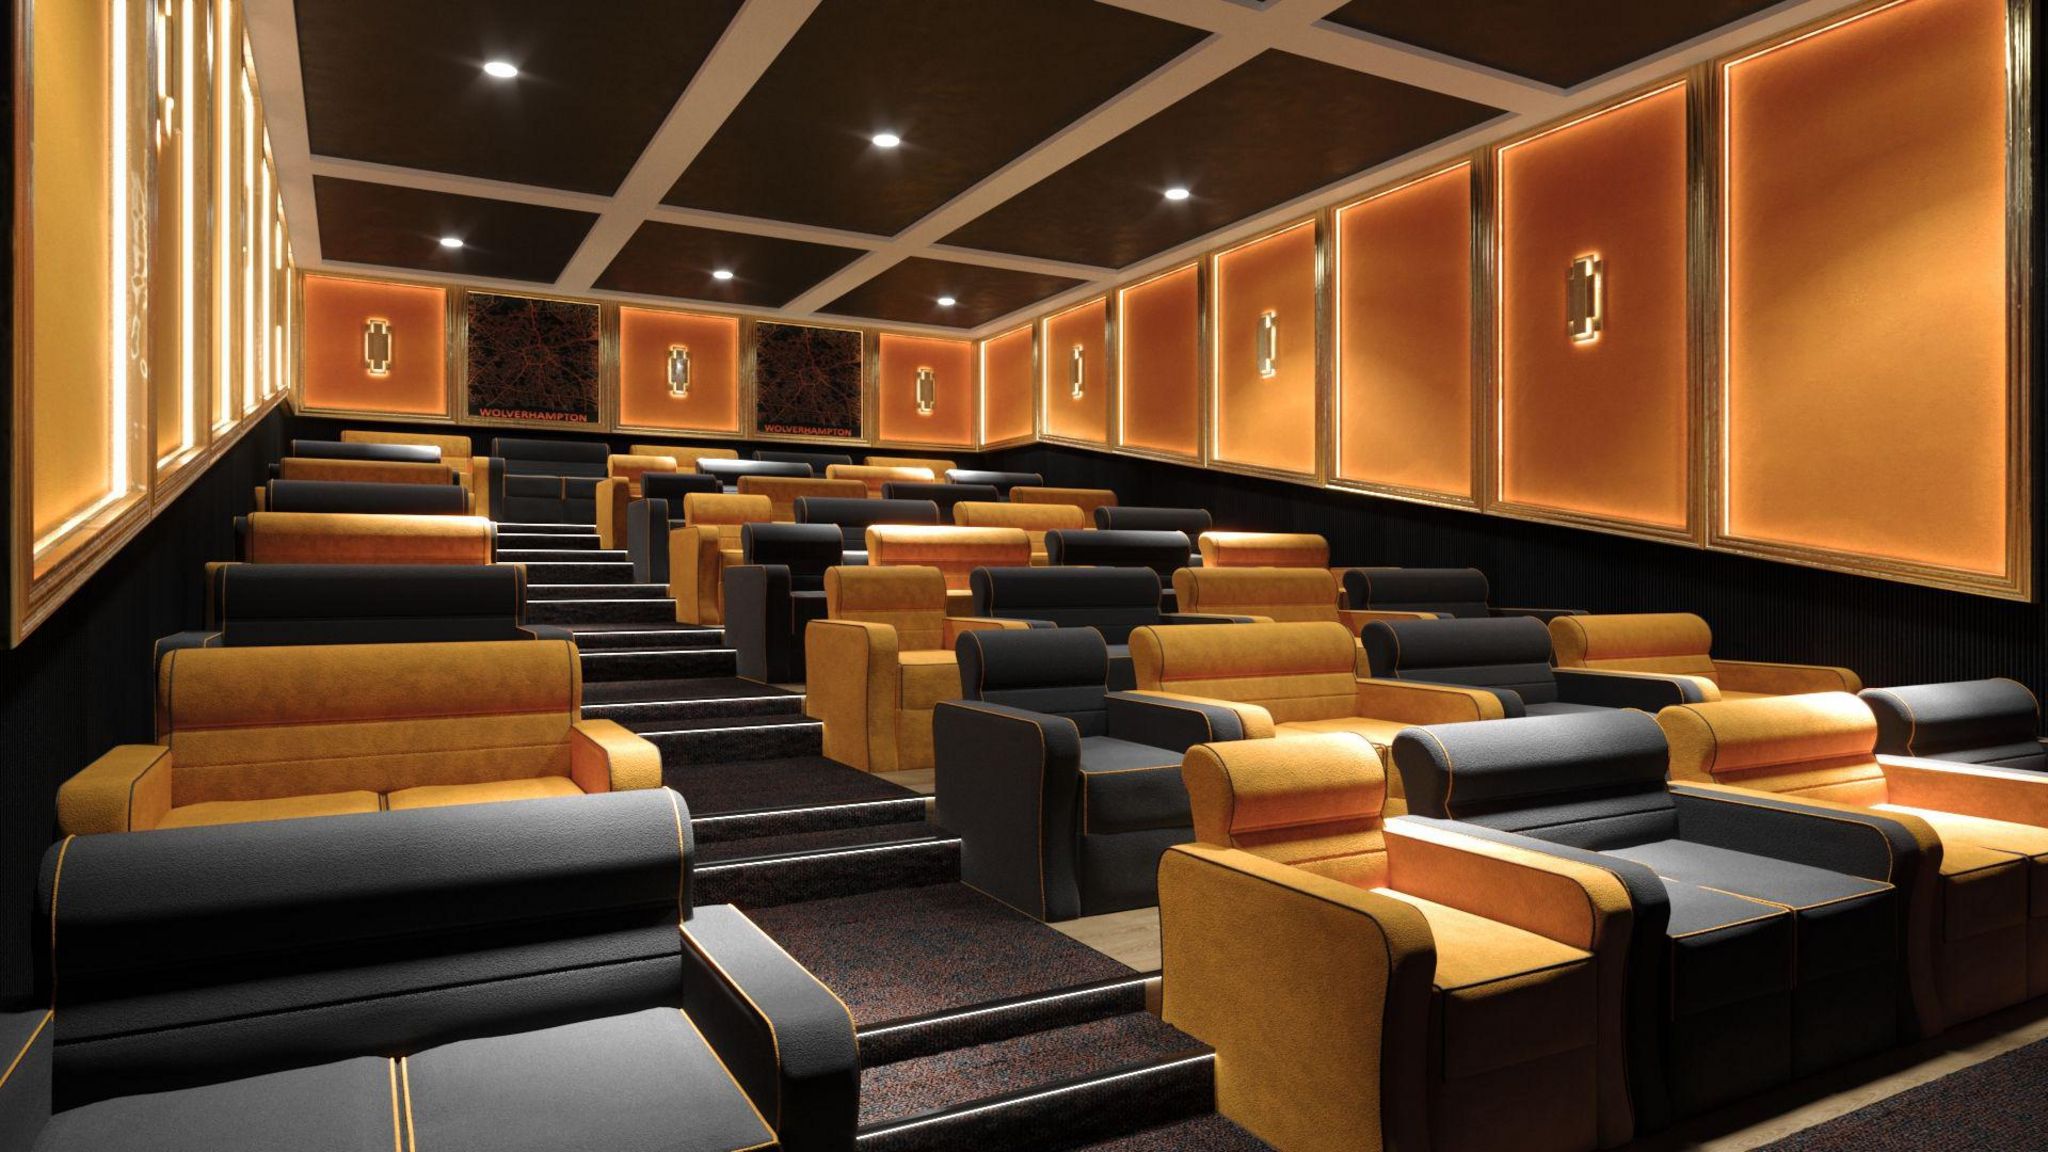 CGI of new cinema layout in Chubb buildings